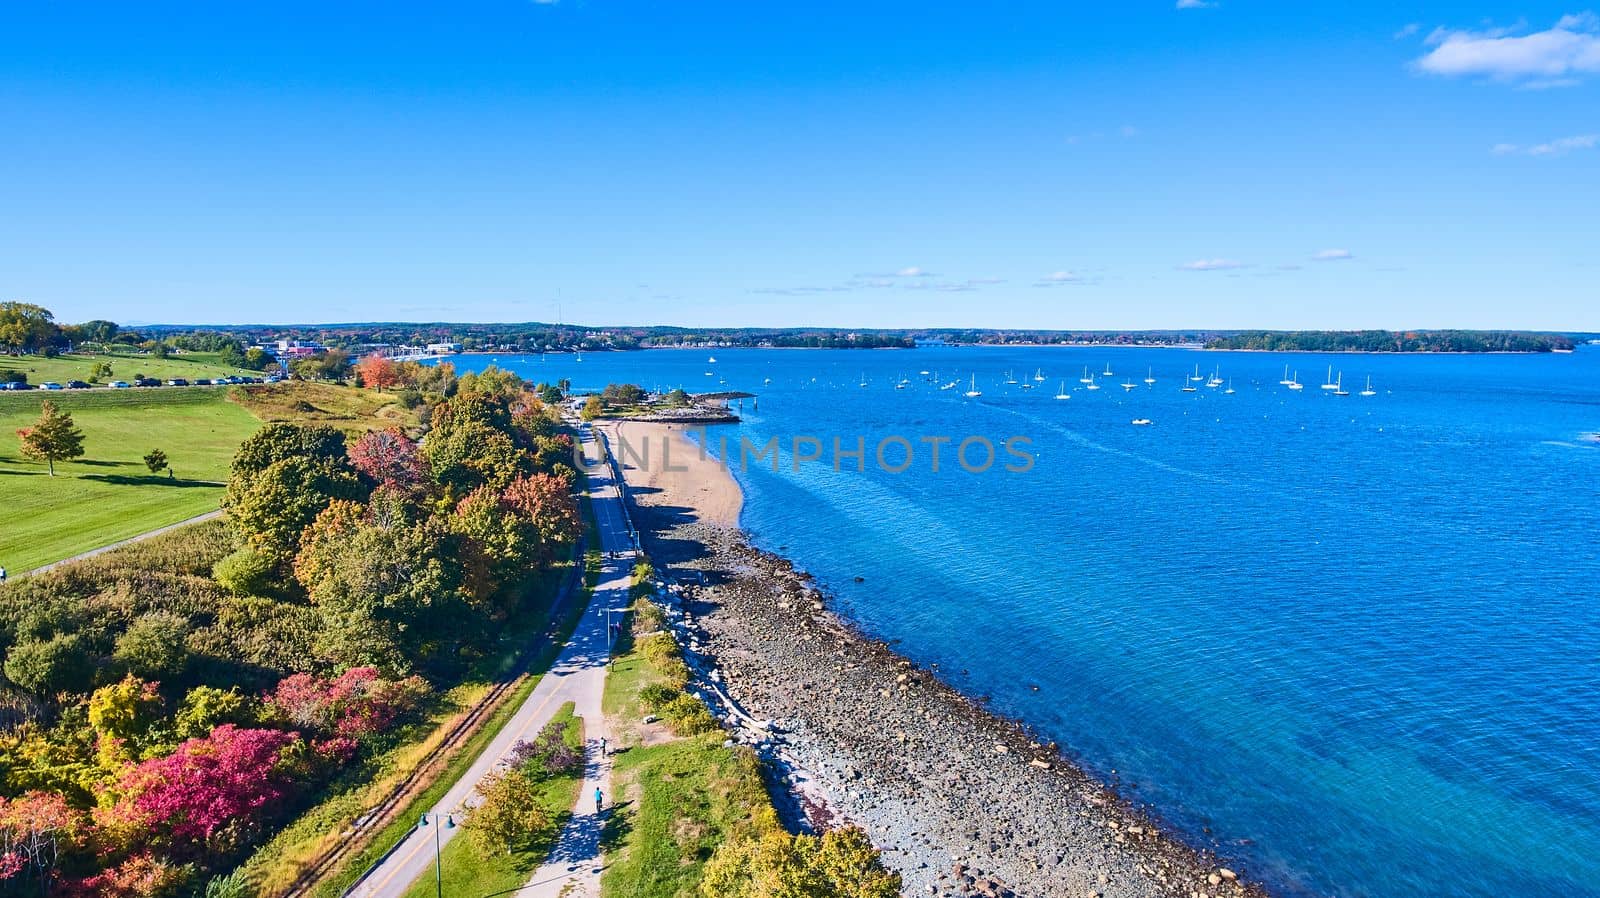 Maine coastline with ocean views, boats, and forest trails by njproductions